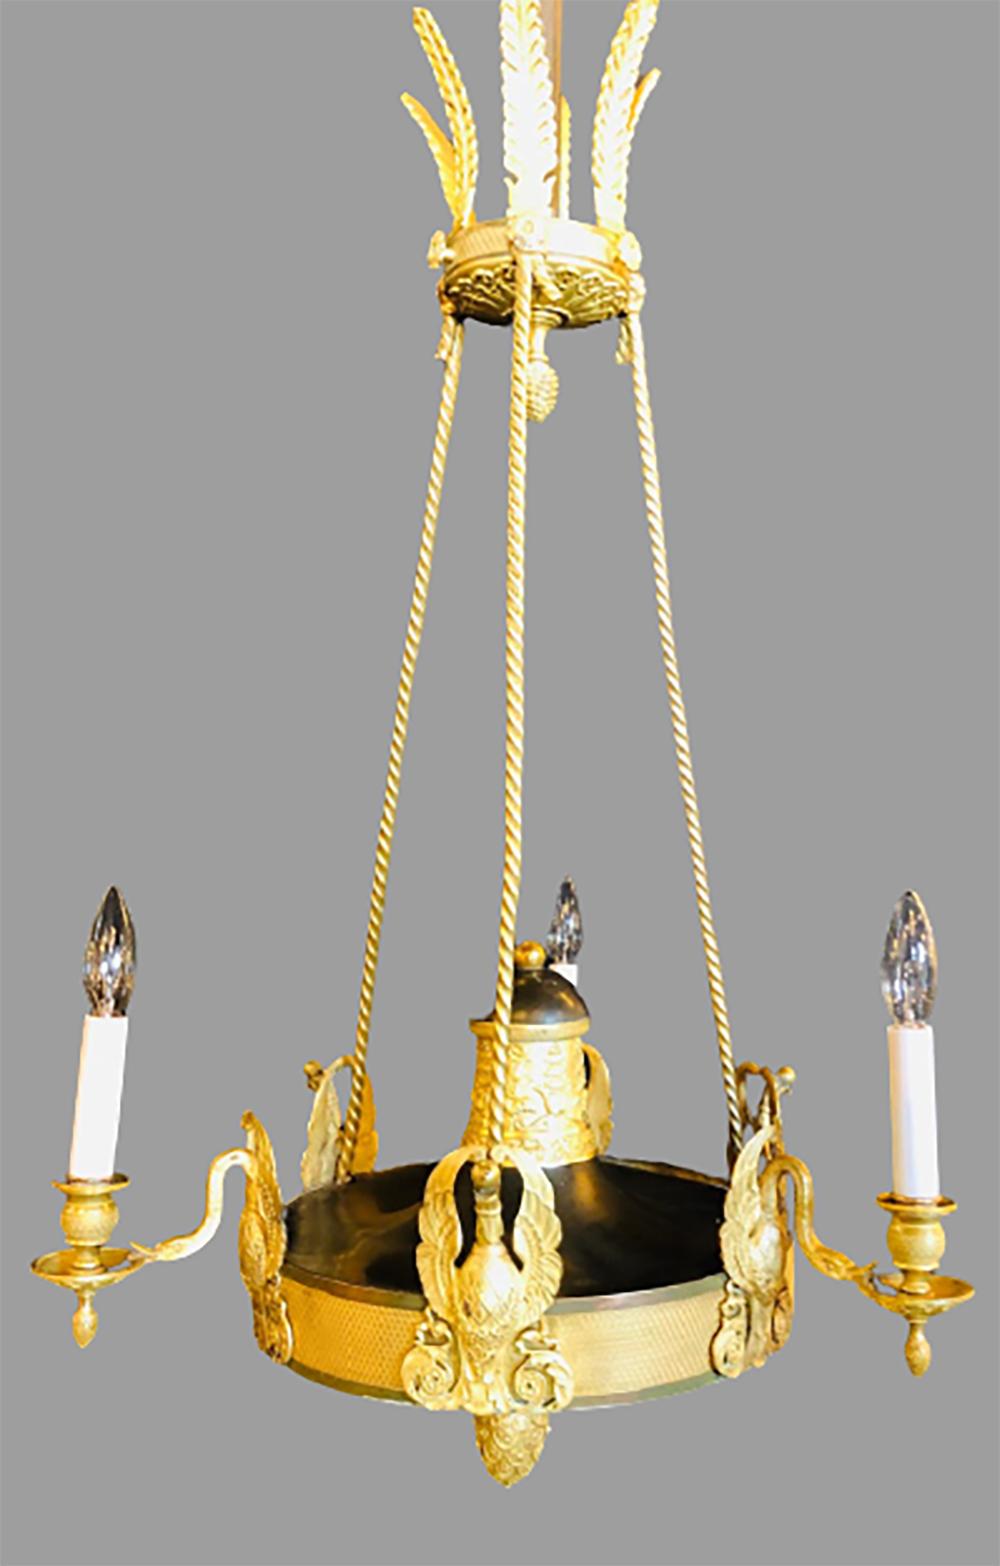 19th century empire chandelier with full figure swan arms. This simply stunning doré bronze chandelier has full bodied swans holding three candlestick lights. The whole with a matching canopy.